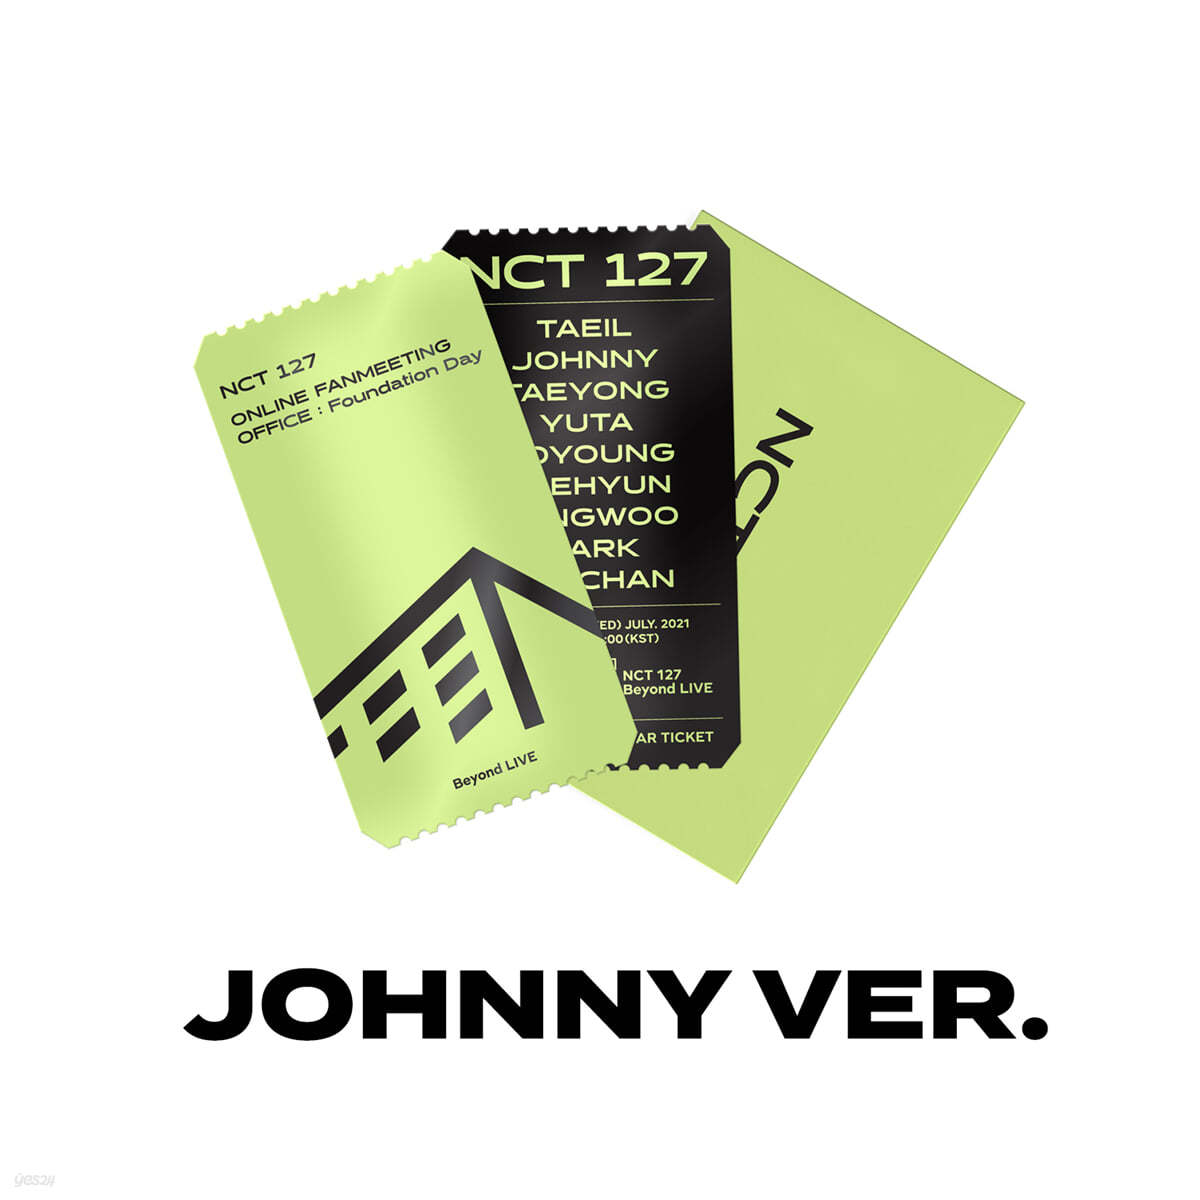 [JOHNNY] SPECIAL AR TICKET SET Beyond LIVE - NCT 127 ONLINE FANMEETING &#39;OFFICE : Foundation Day&#39;